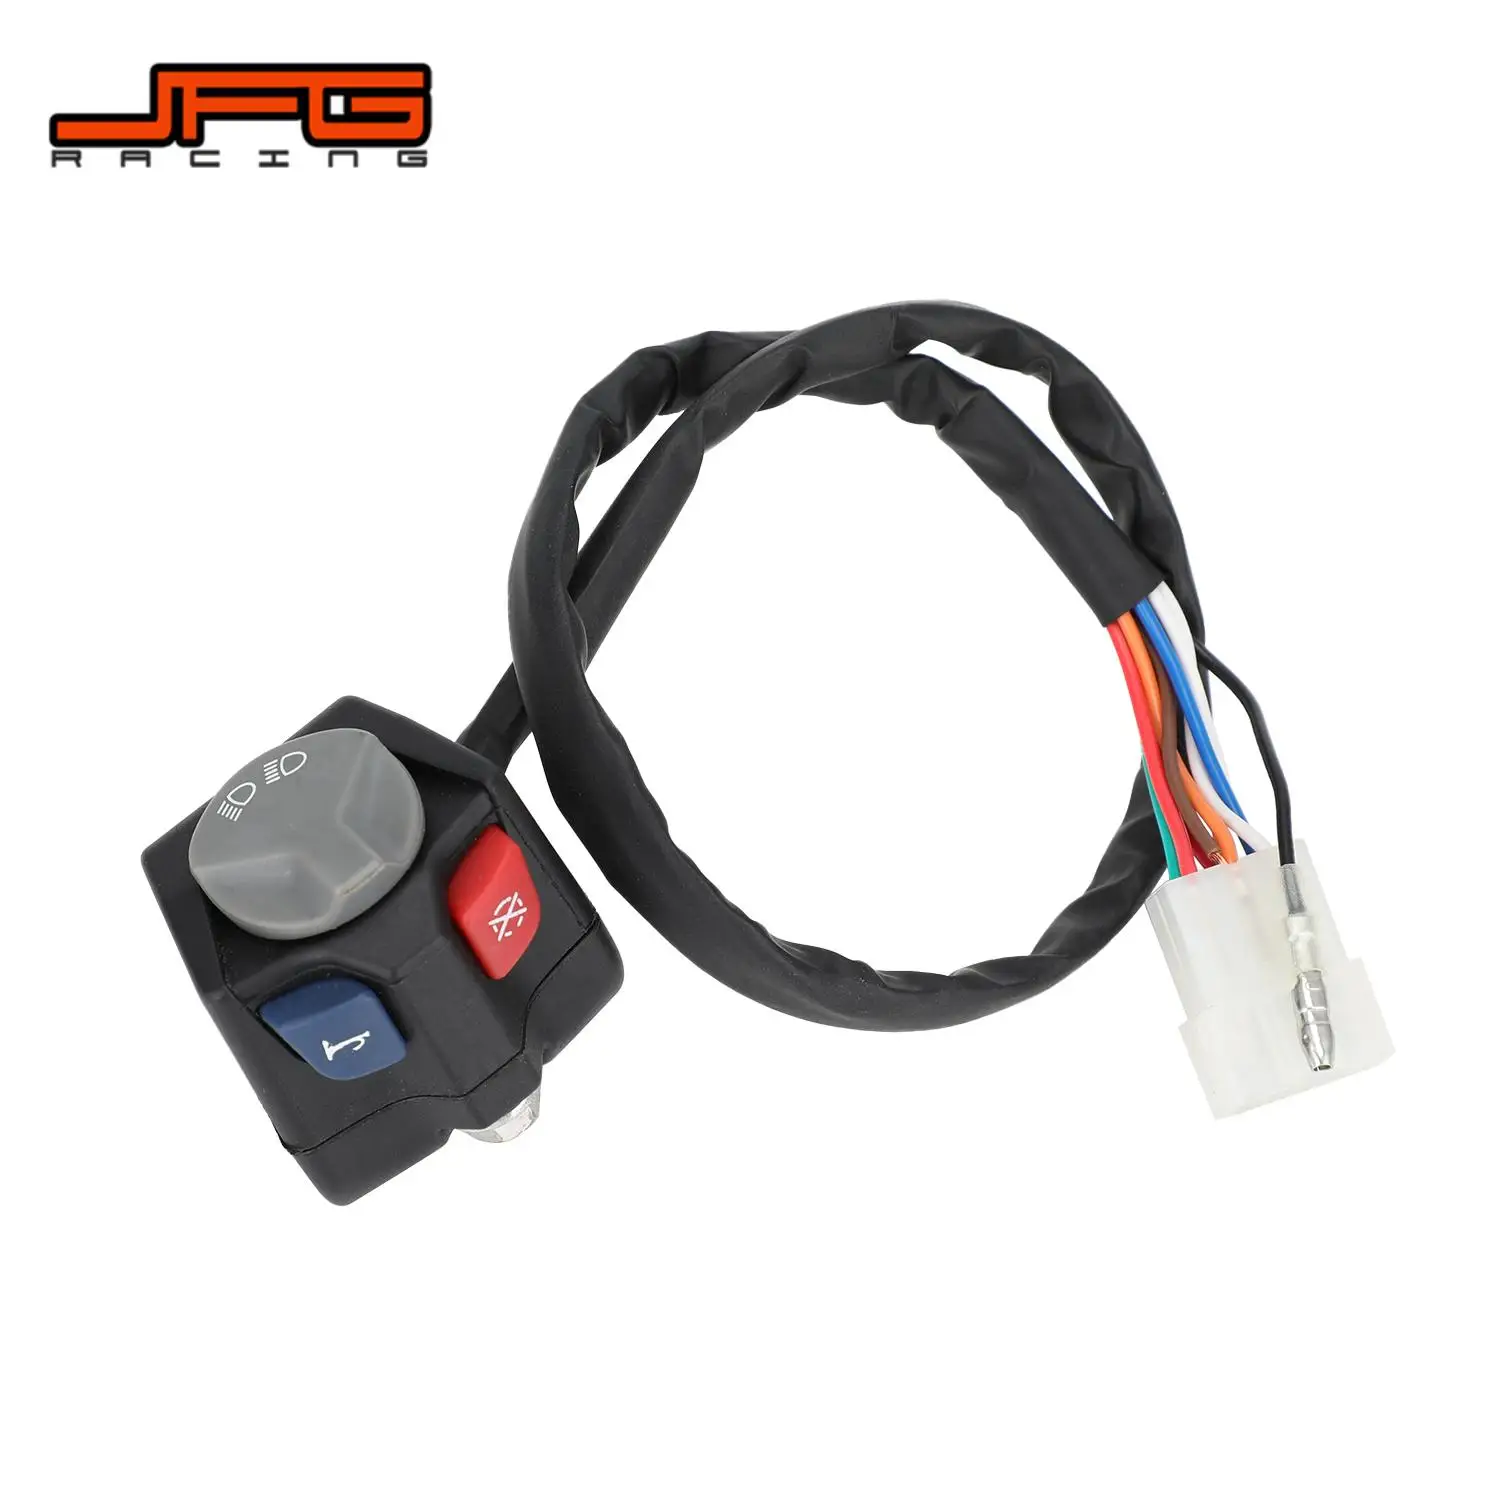 Motorcycle Headlight Horn Kill switch For KTM EXC XCW EXCF TPI 125 150 200 250 350 450 500 525 530 For Husqvarna TE FE TX FX